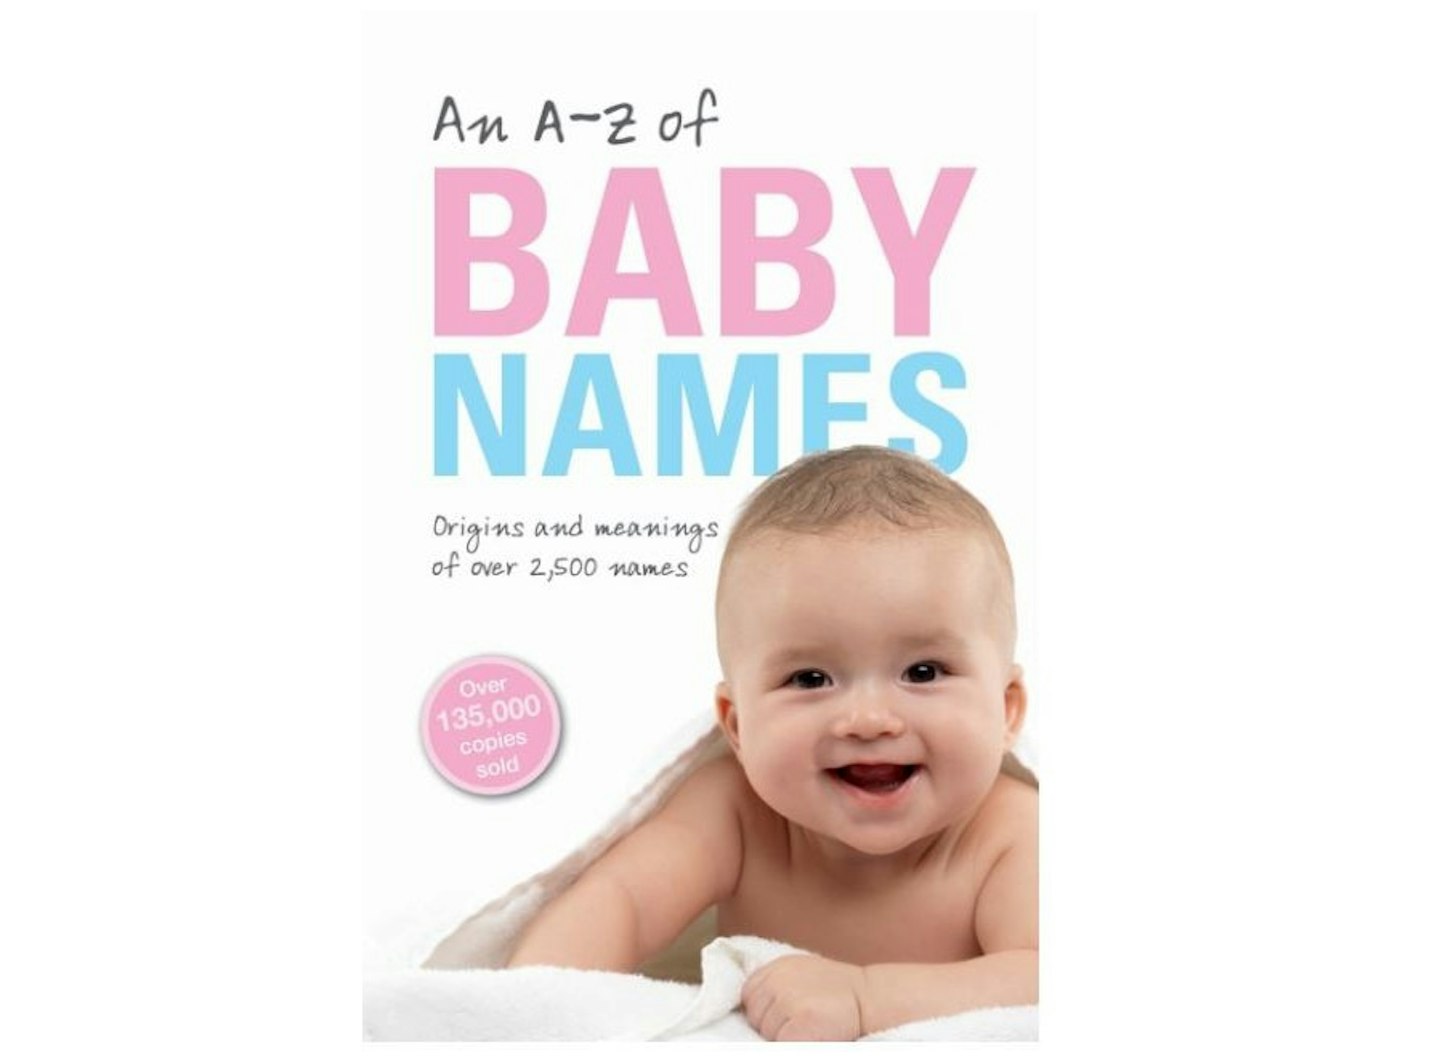 An A-Z of Baby Names, 4.45